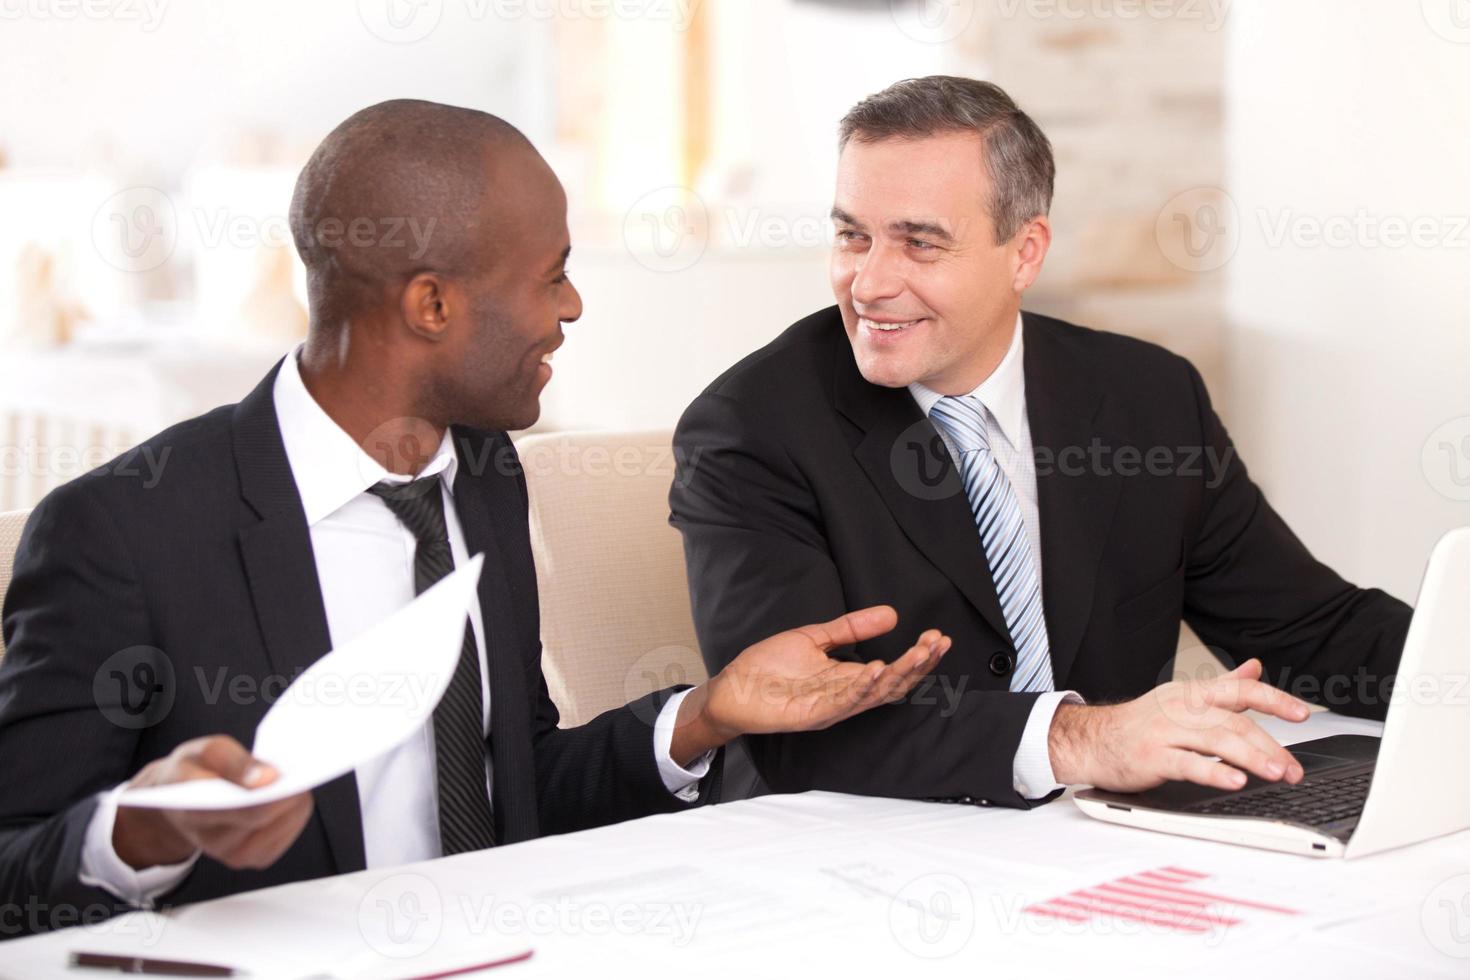 Discussing a project. Two cheerful business people in formalwear discussing something while one of them gesturing and smiling photo